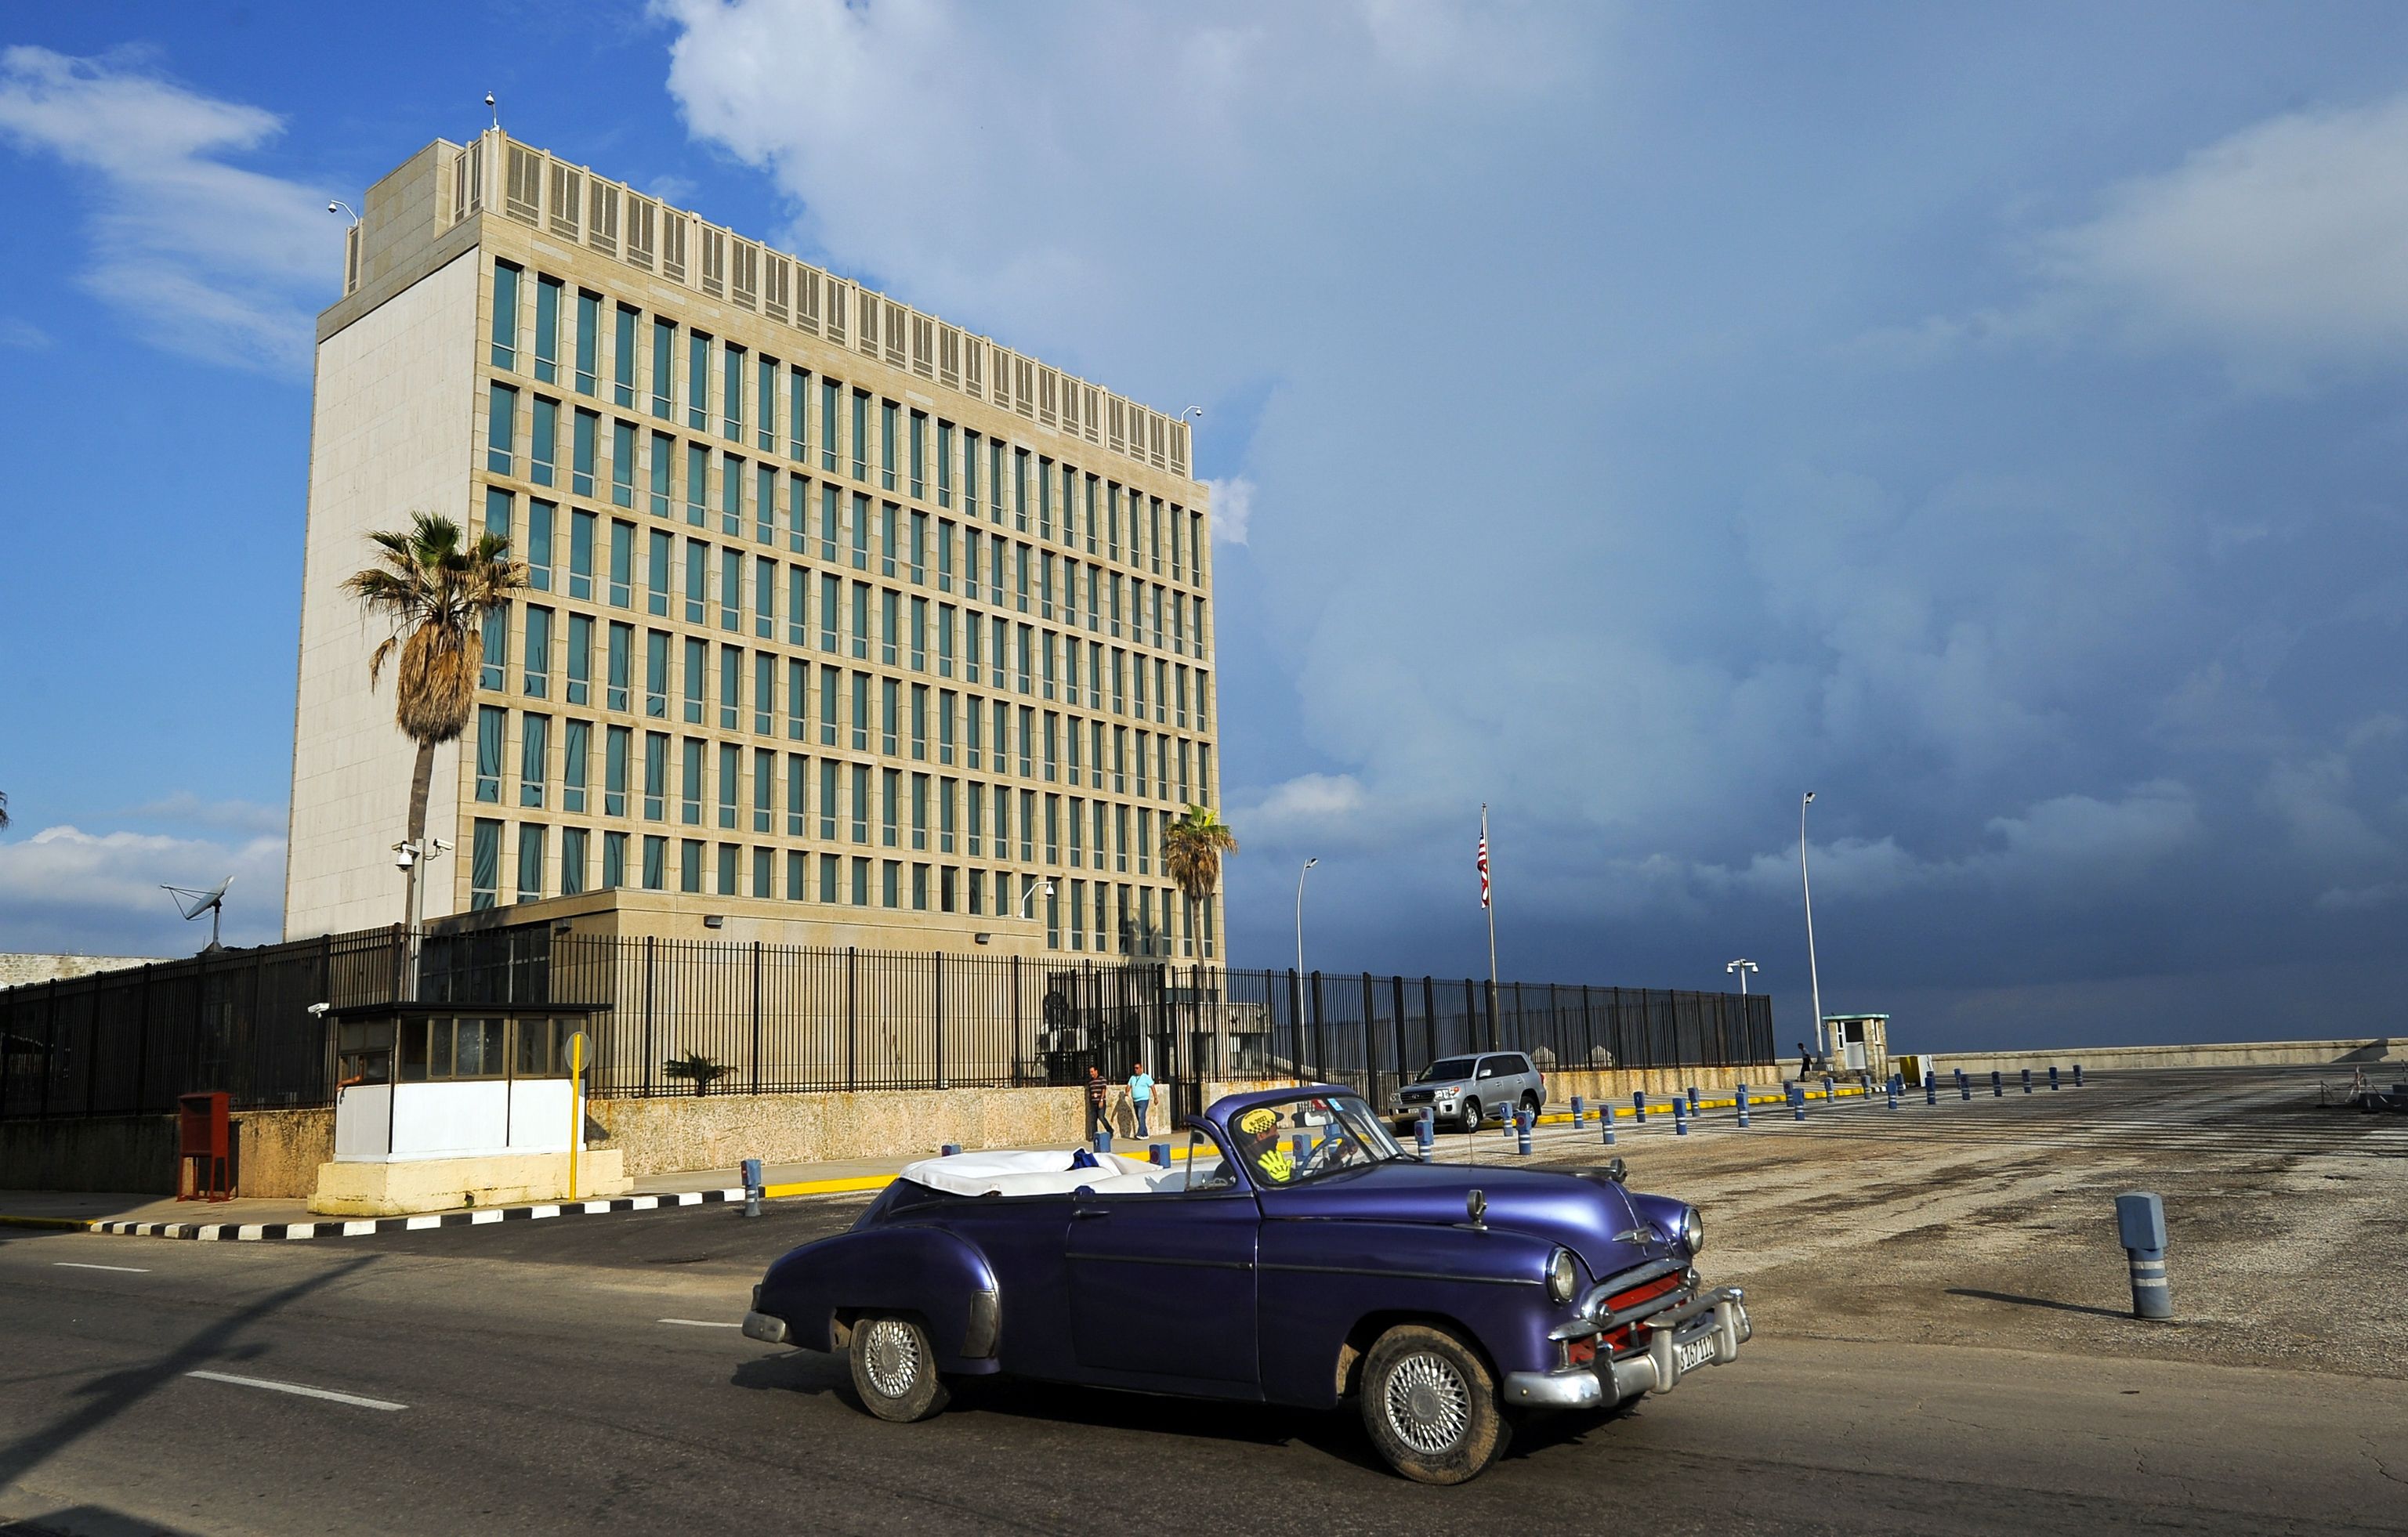 The US Embassy in Cuba was the site of the first display of symptoms of the Havana syndrome